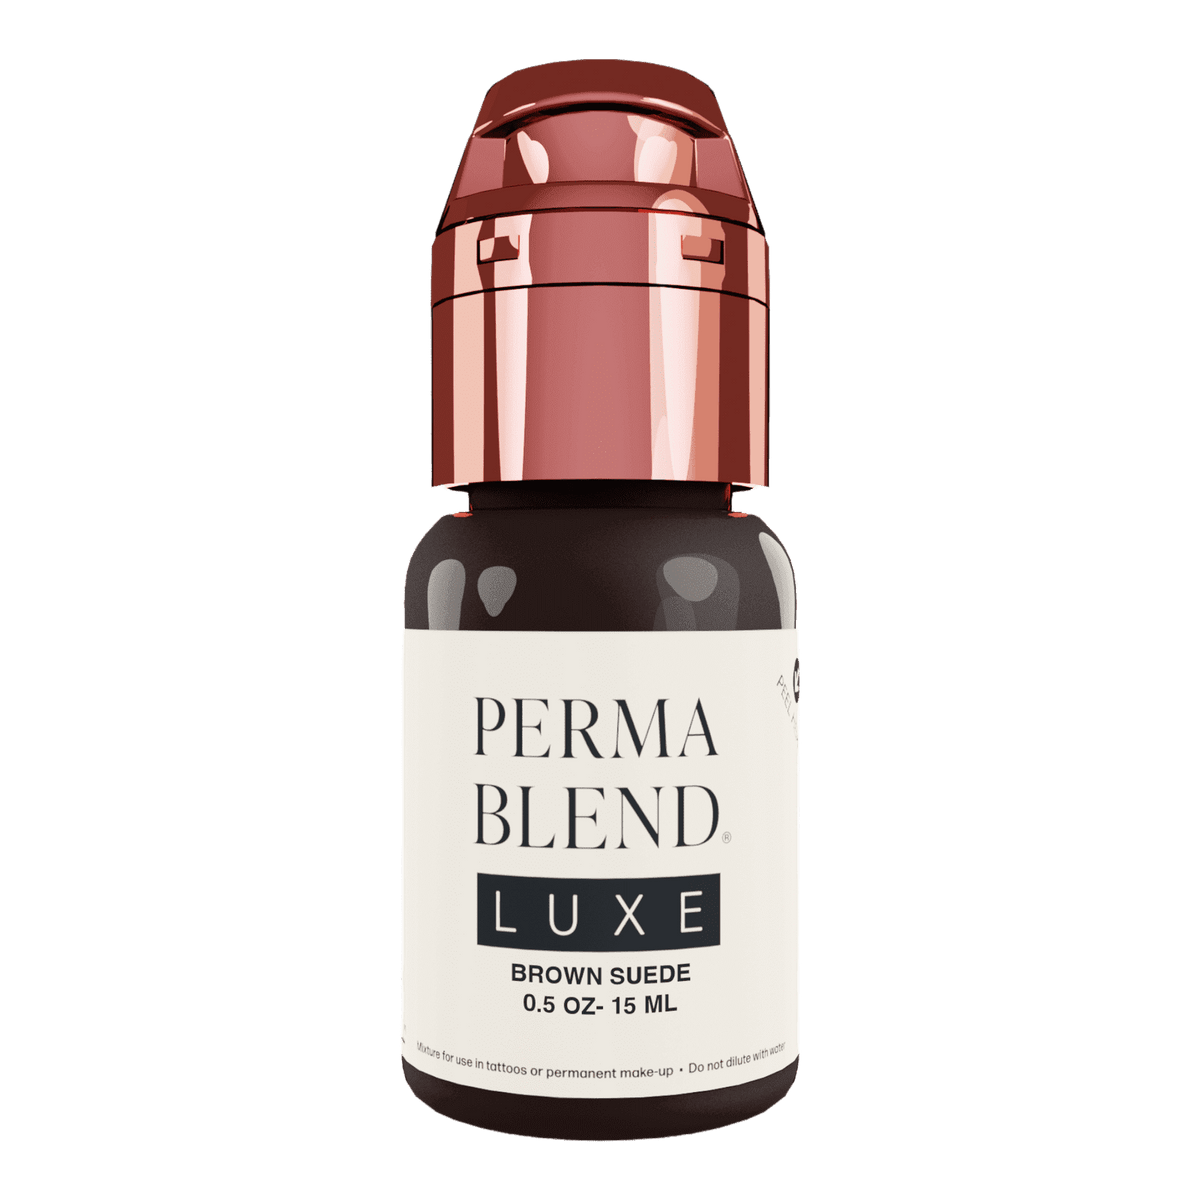 Perma Blend Luxe Brown Suede